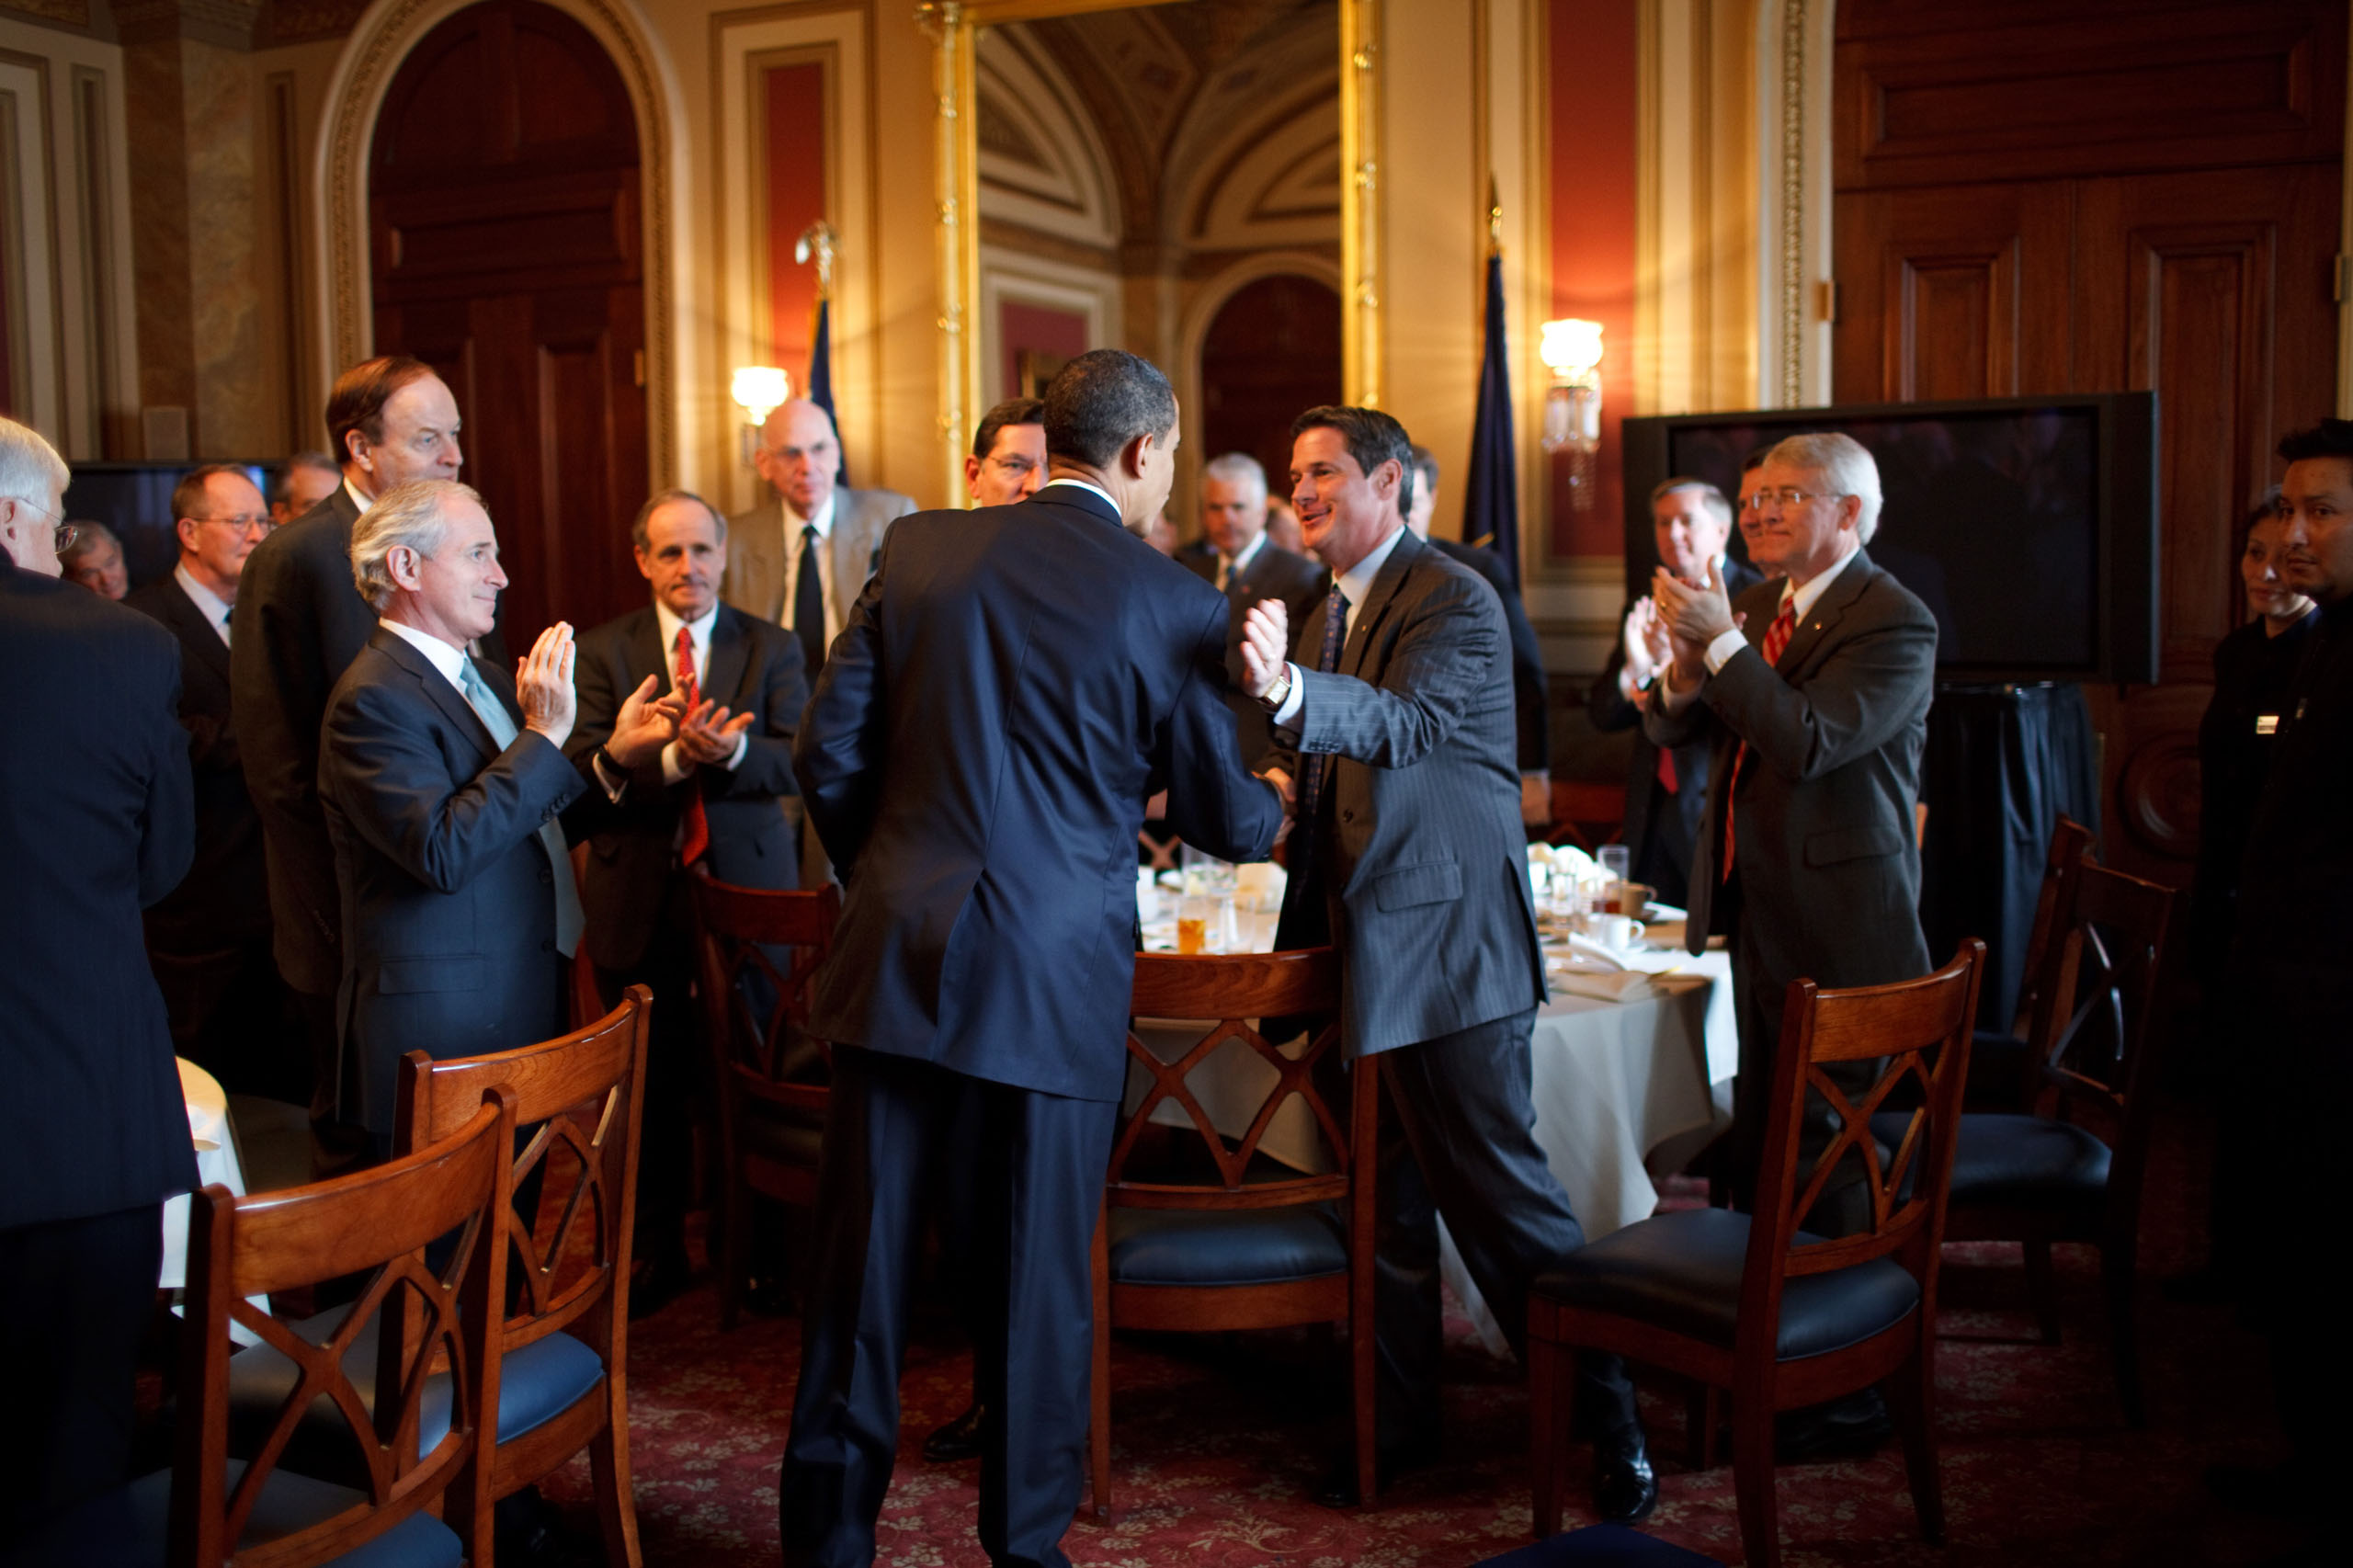 President Barack Obama attends a lunch with Senate Republicans on Capitol Hill, Washington D.C, on Jan. 27, 2009.